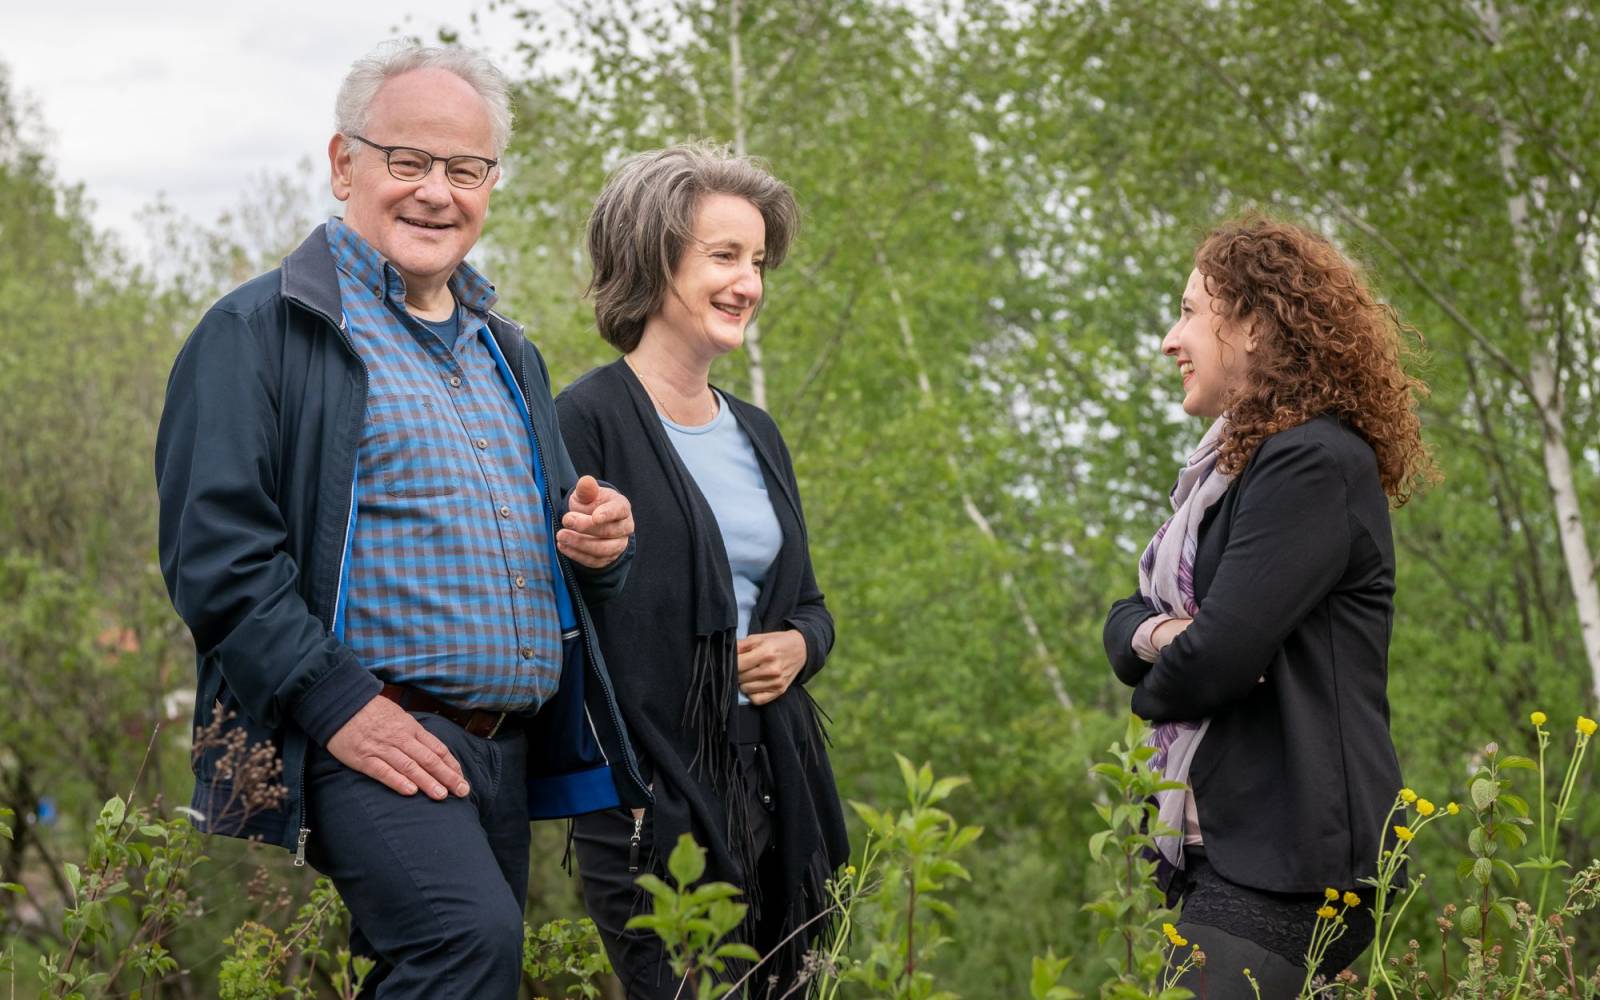 One gentleman and two ladies in nature chatting